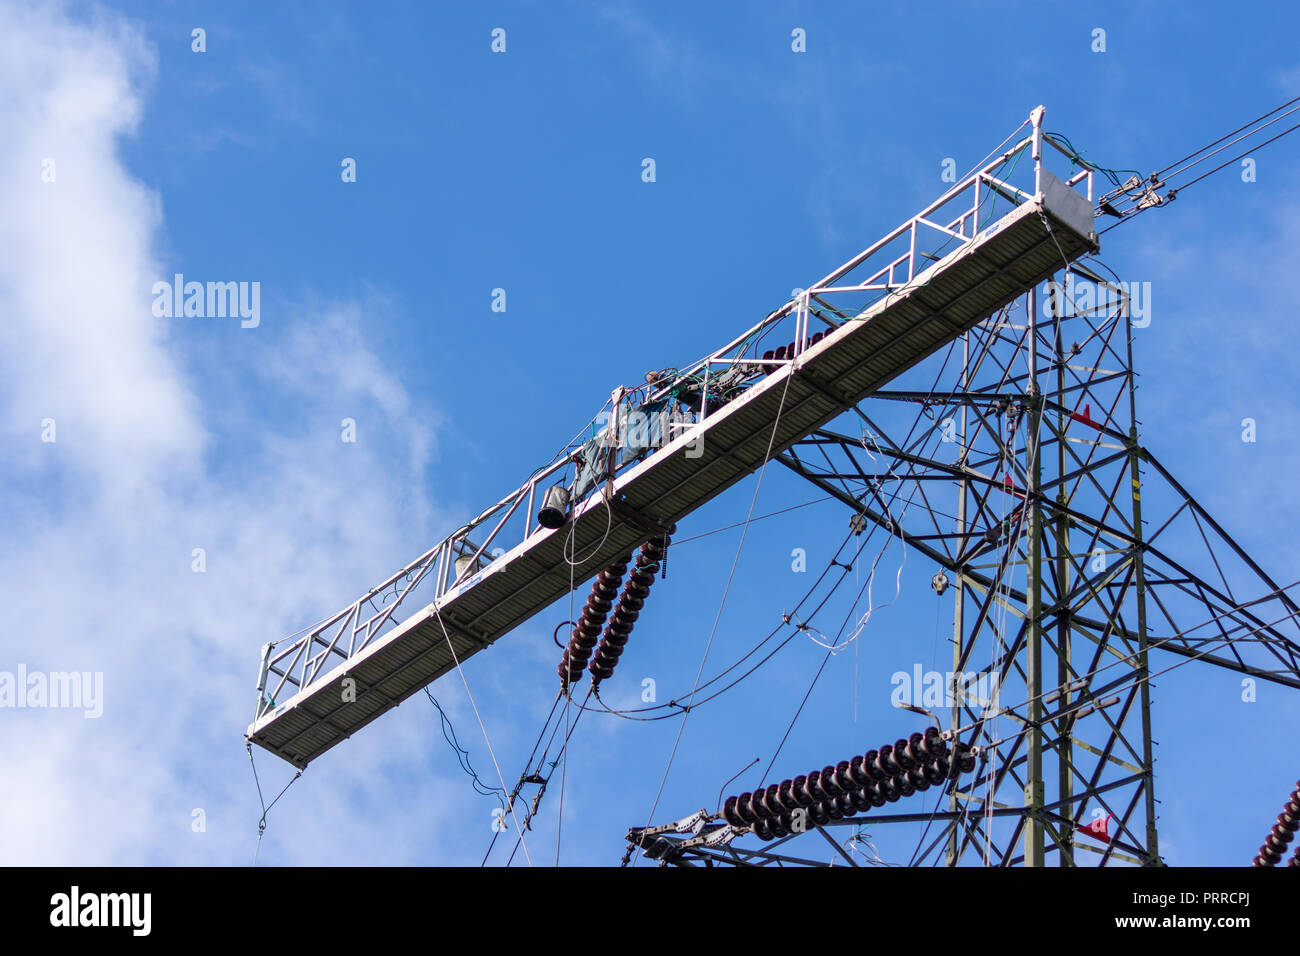 Large temporary work platform attached to an electricity pylon to allow work to be done on pylon and power lines Stock Photo